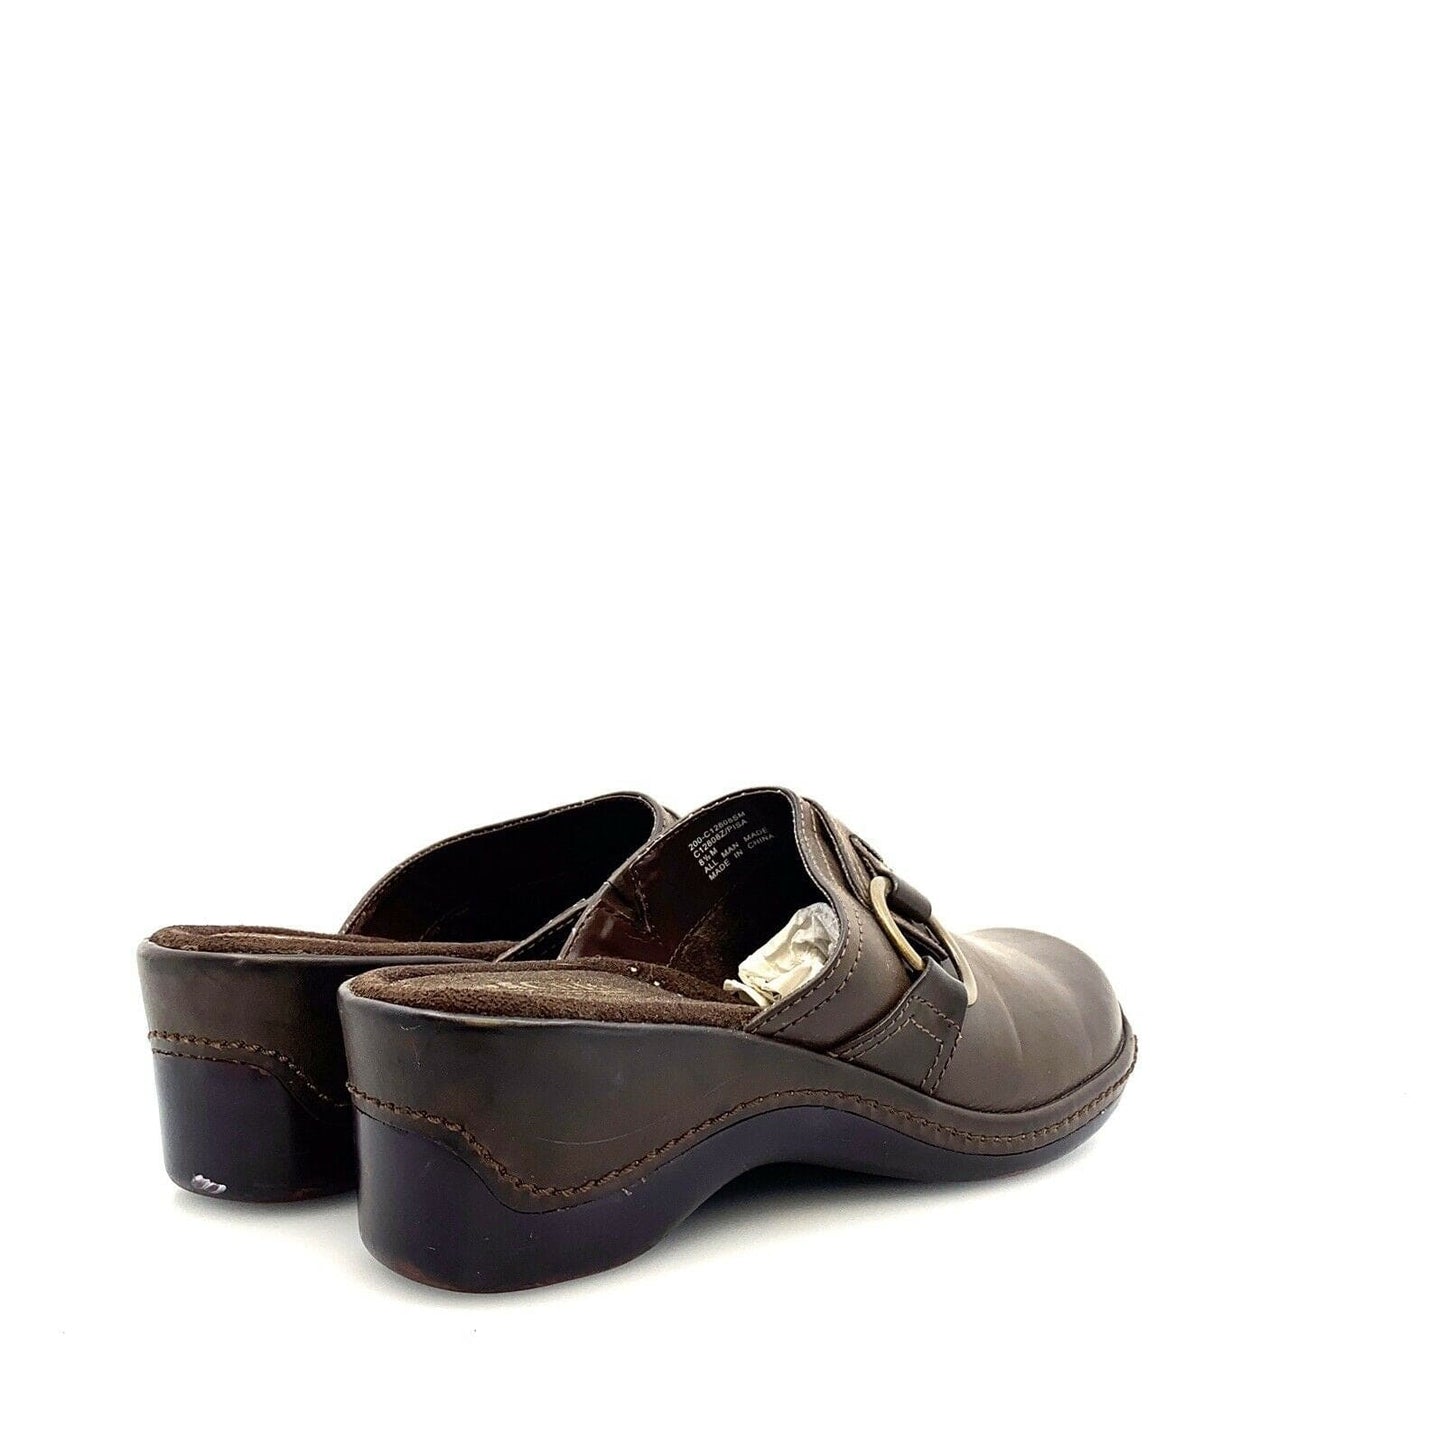 Cliffs By White Mountain Womens Pisa Mules Shoes, Brown - Size 8.5M